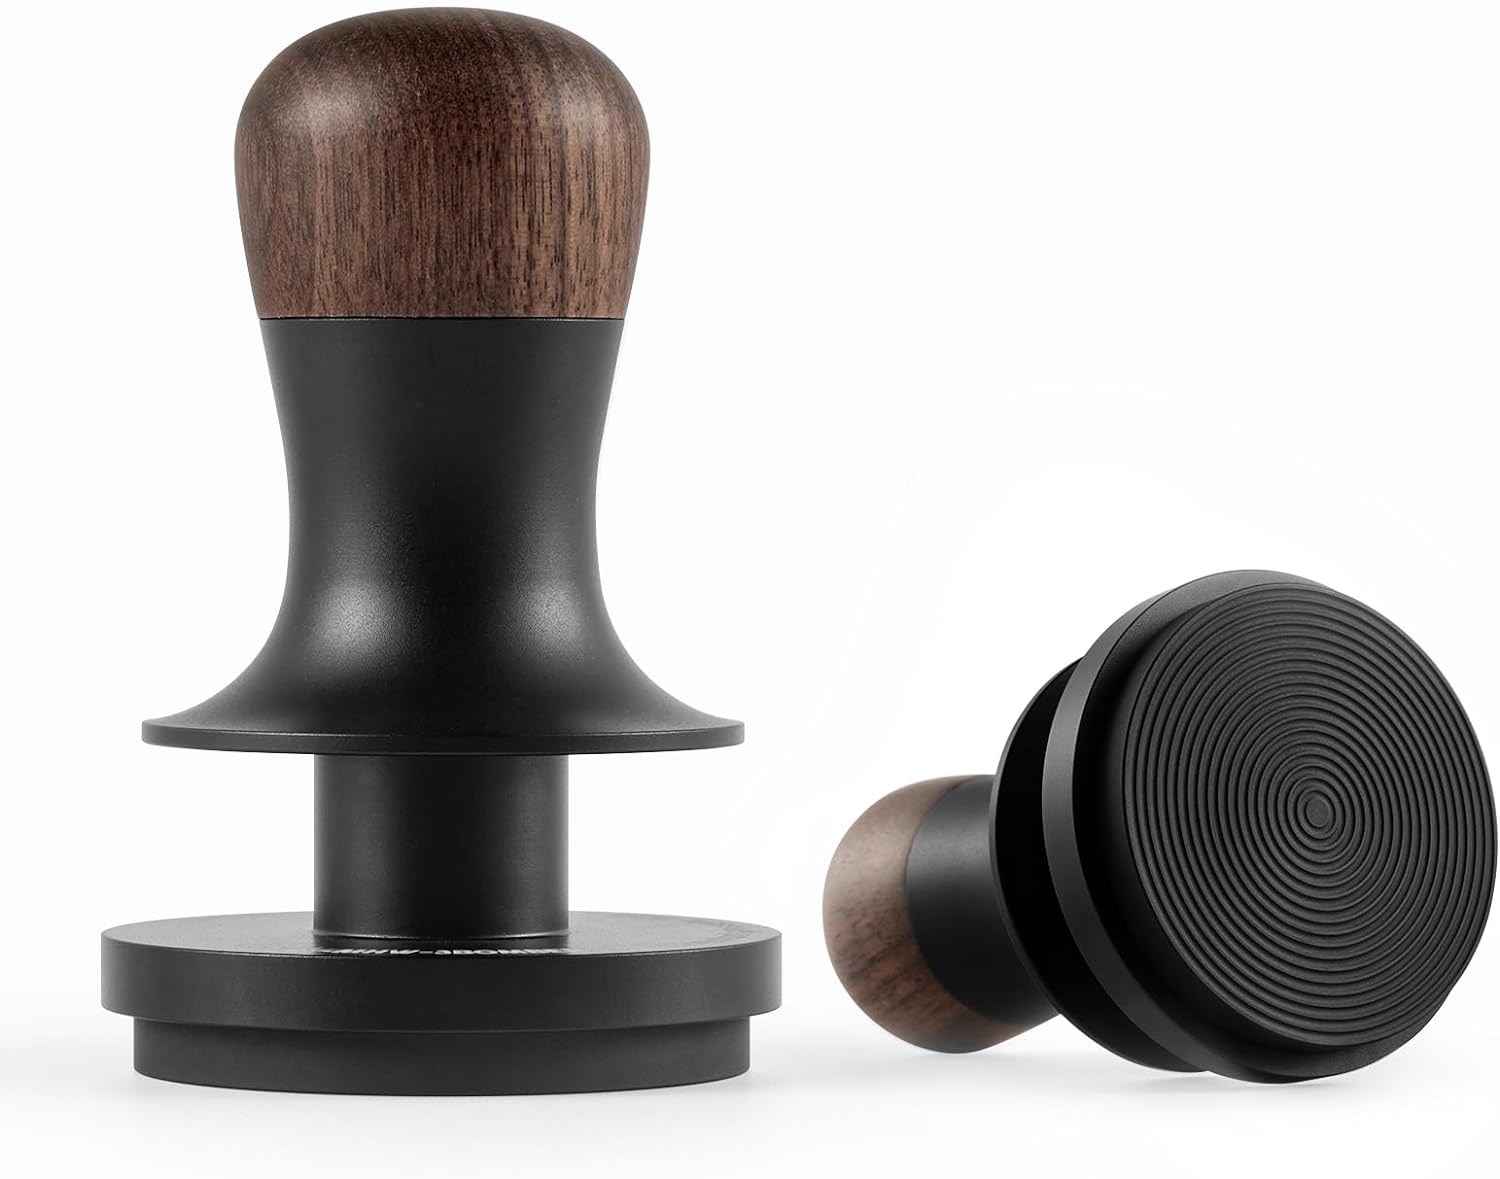 MHW-3BOMBER 58mm Espresso Coffee Tamper with Three Spring Loaded Calibrated Tamper 30lbs Espresso Hand Tamper with Sound Feedback Titanium Coating Black T6176T